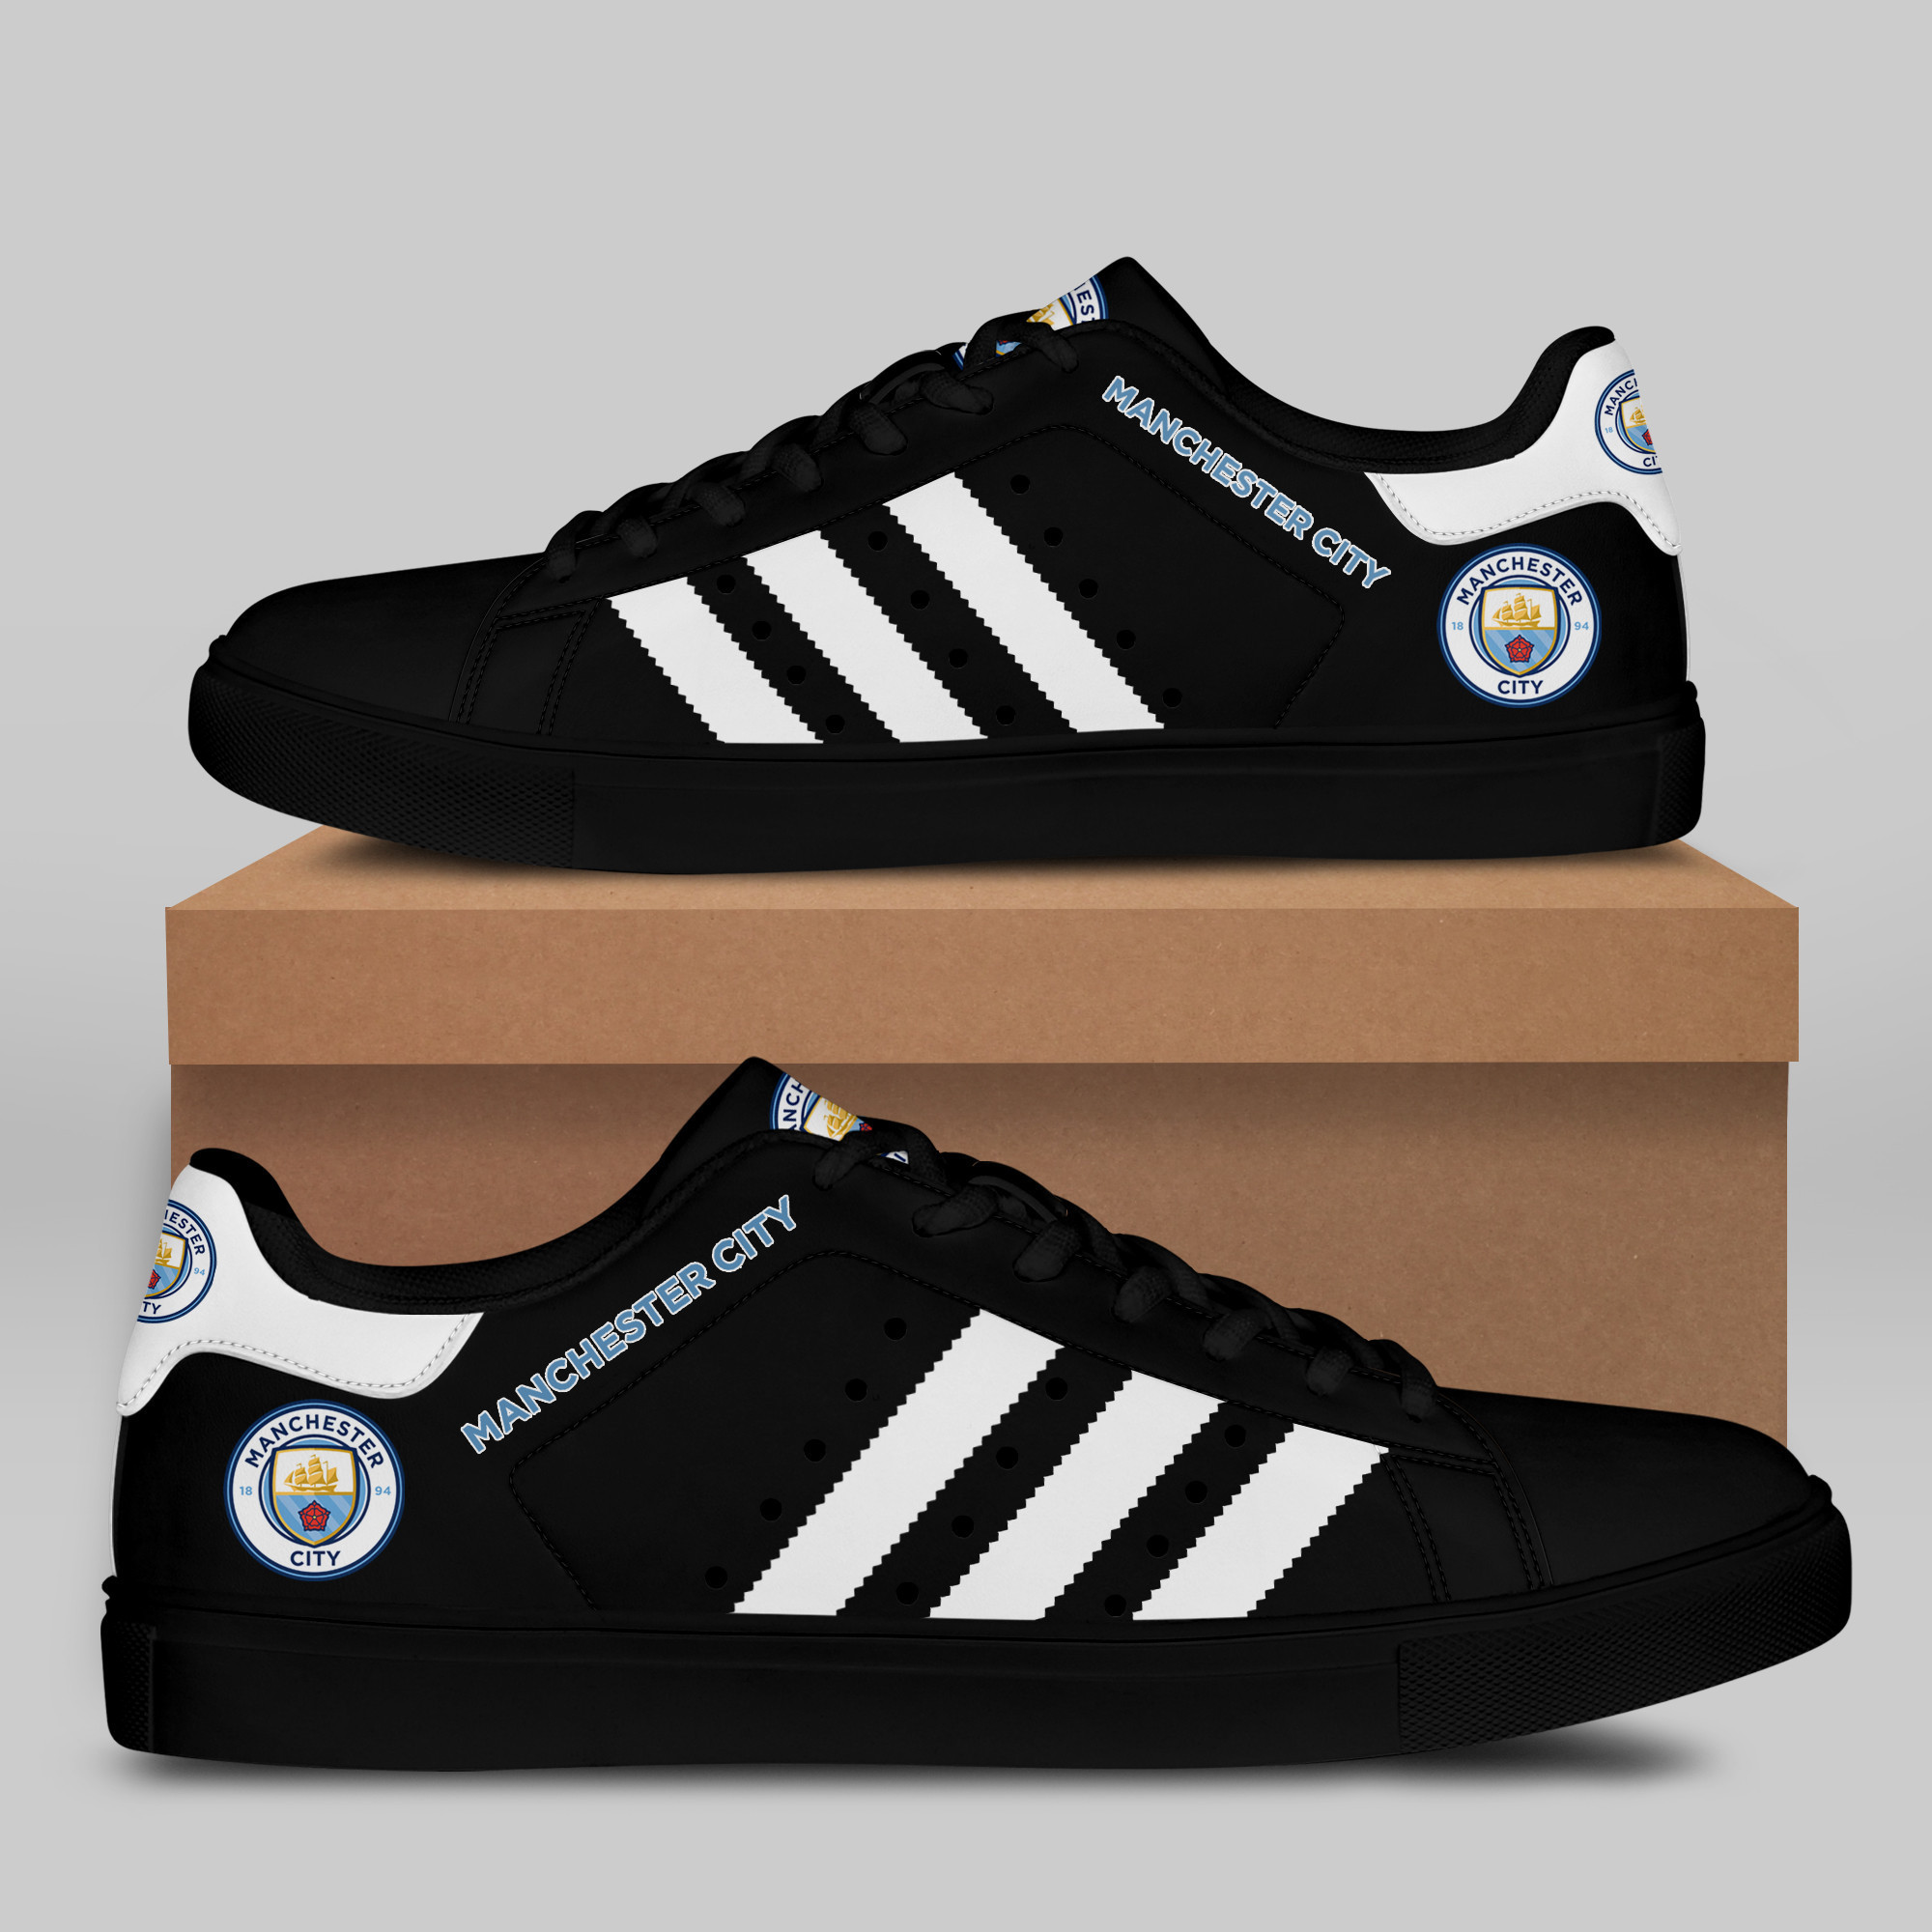 Man City Stn Smith Shoes Ver 4